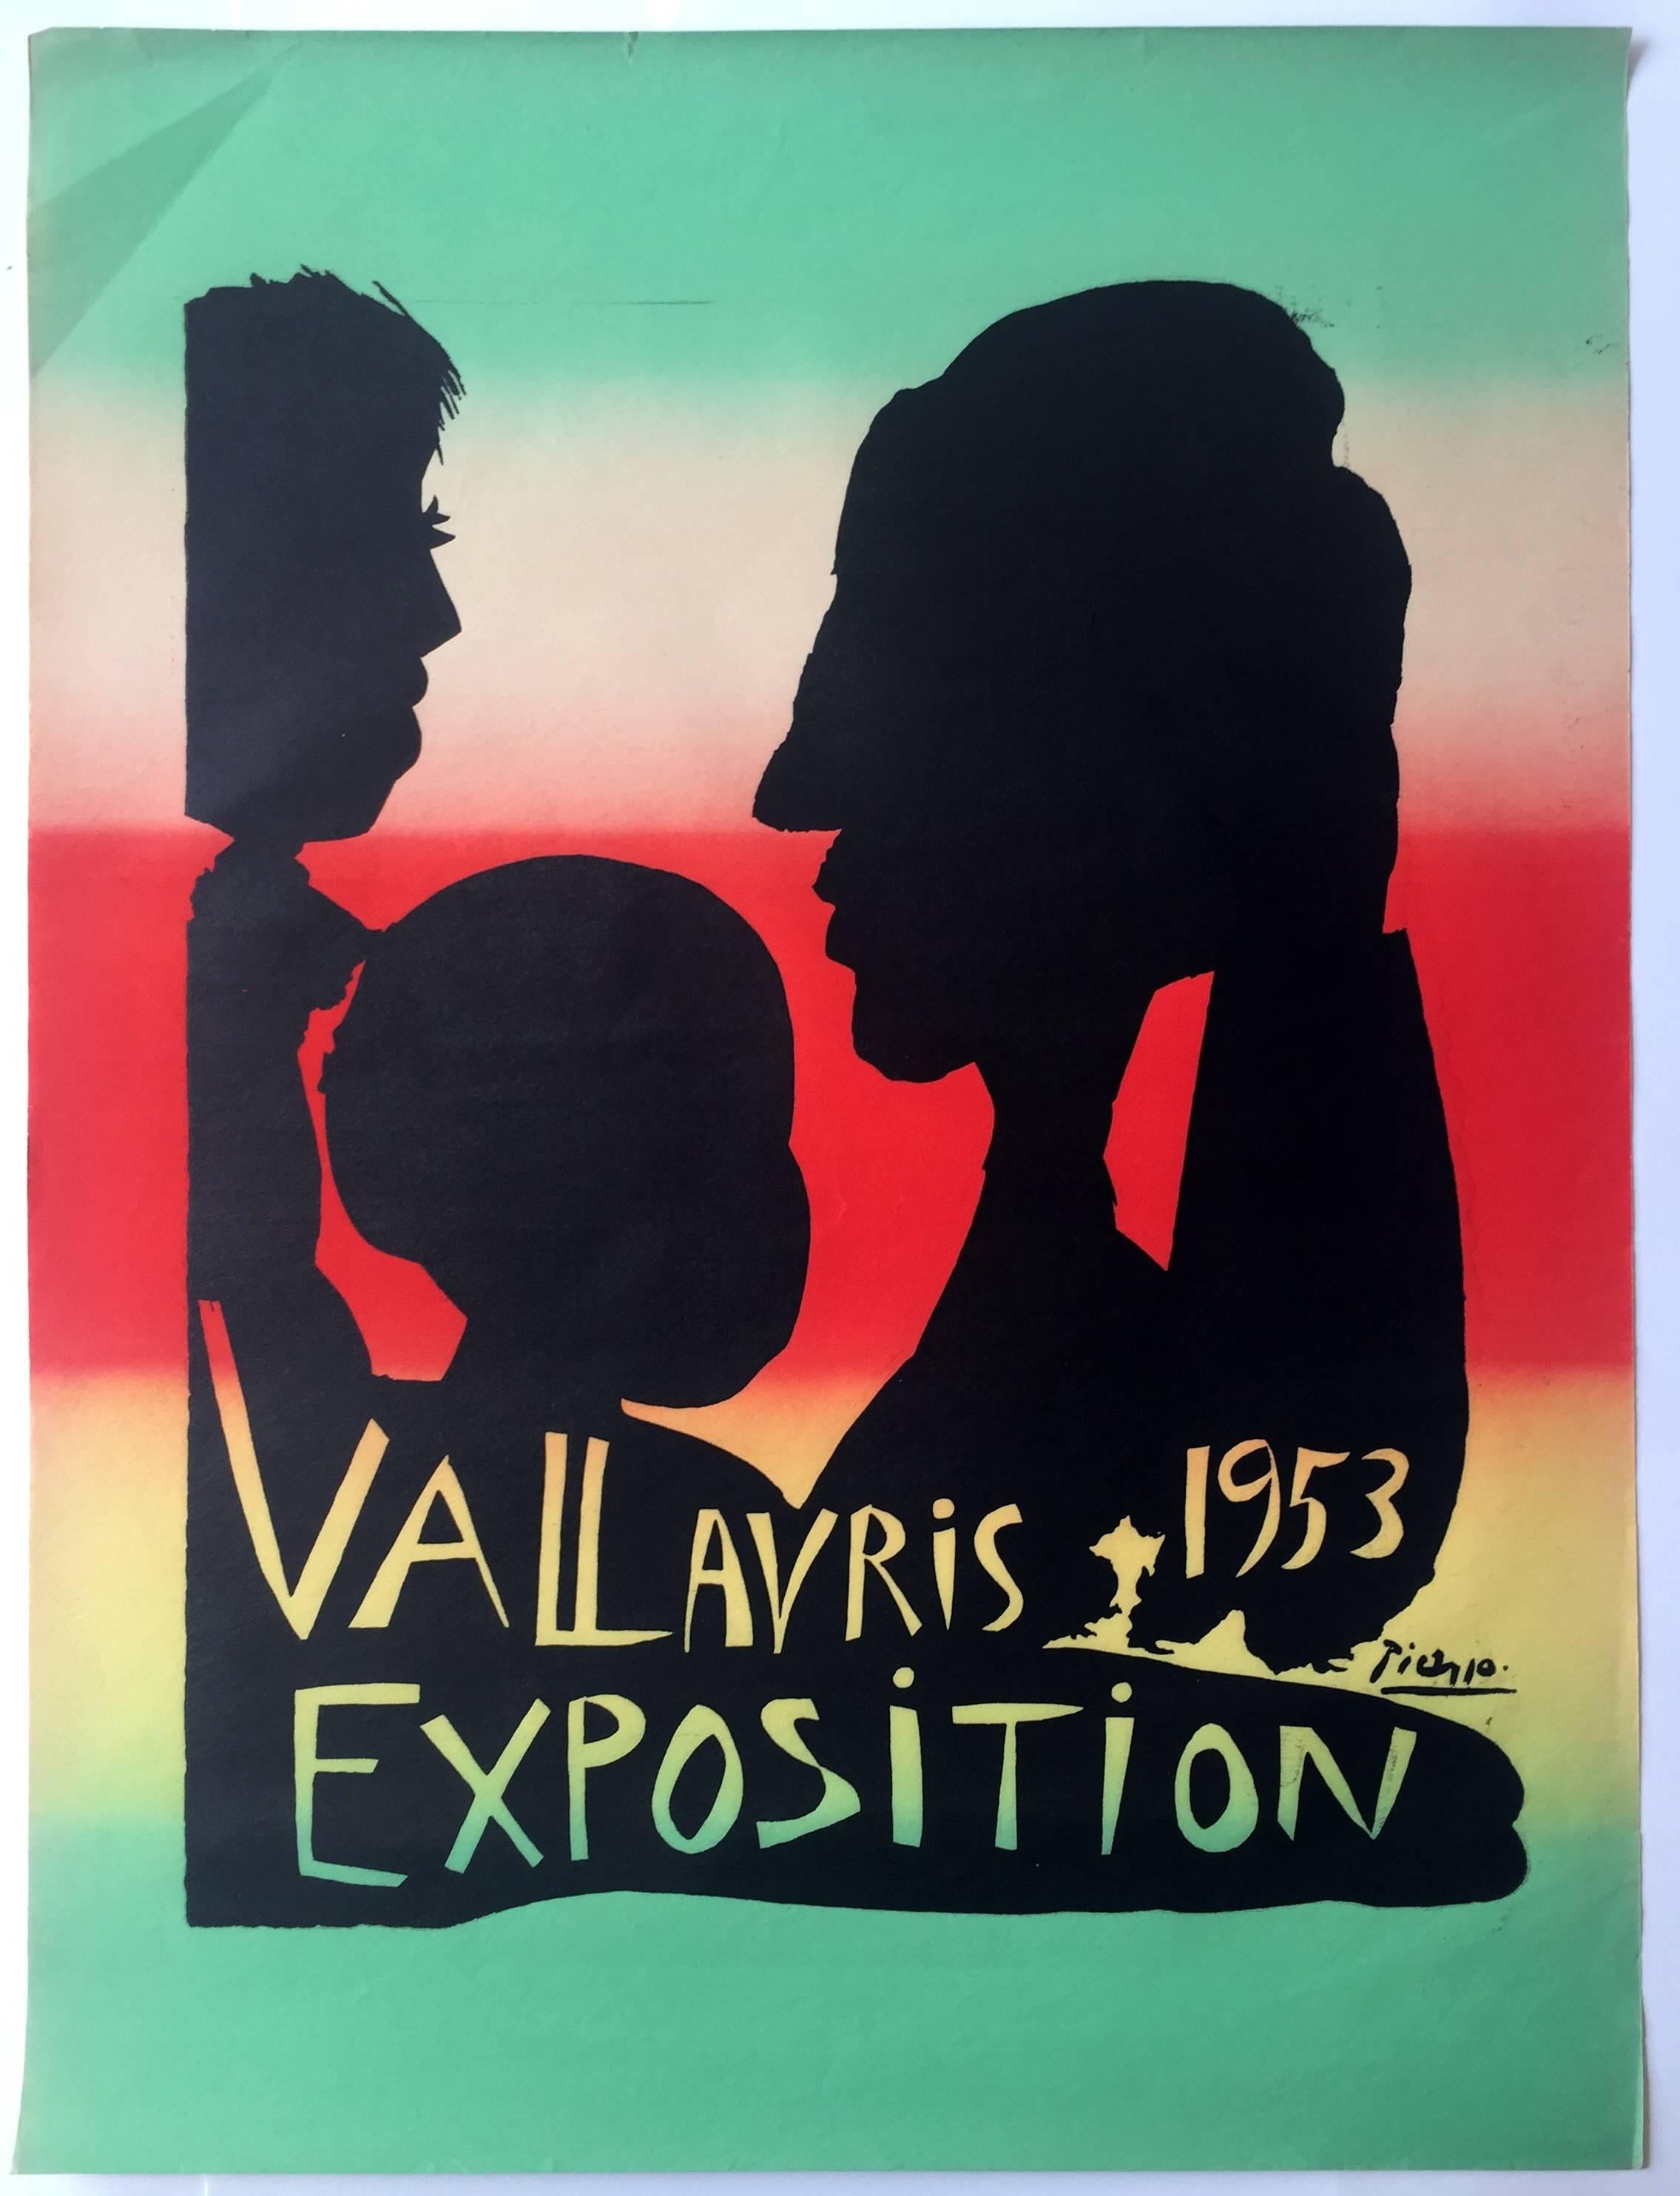 Exposition Vallauris 1953 - Print by Pablo Picasso